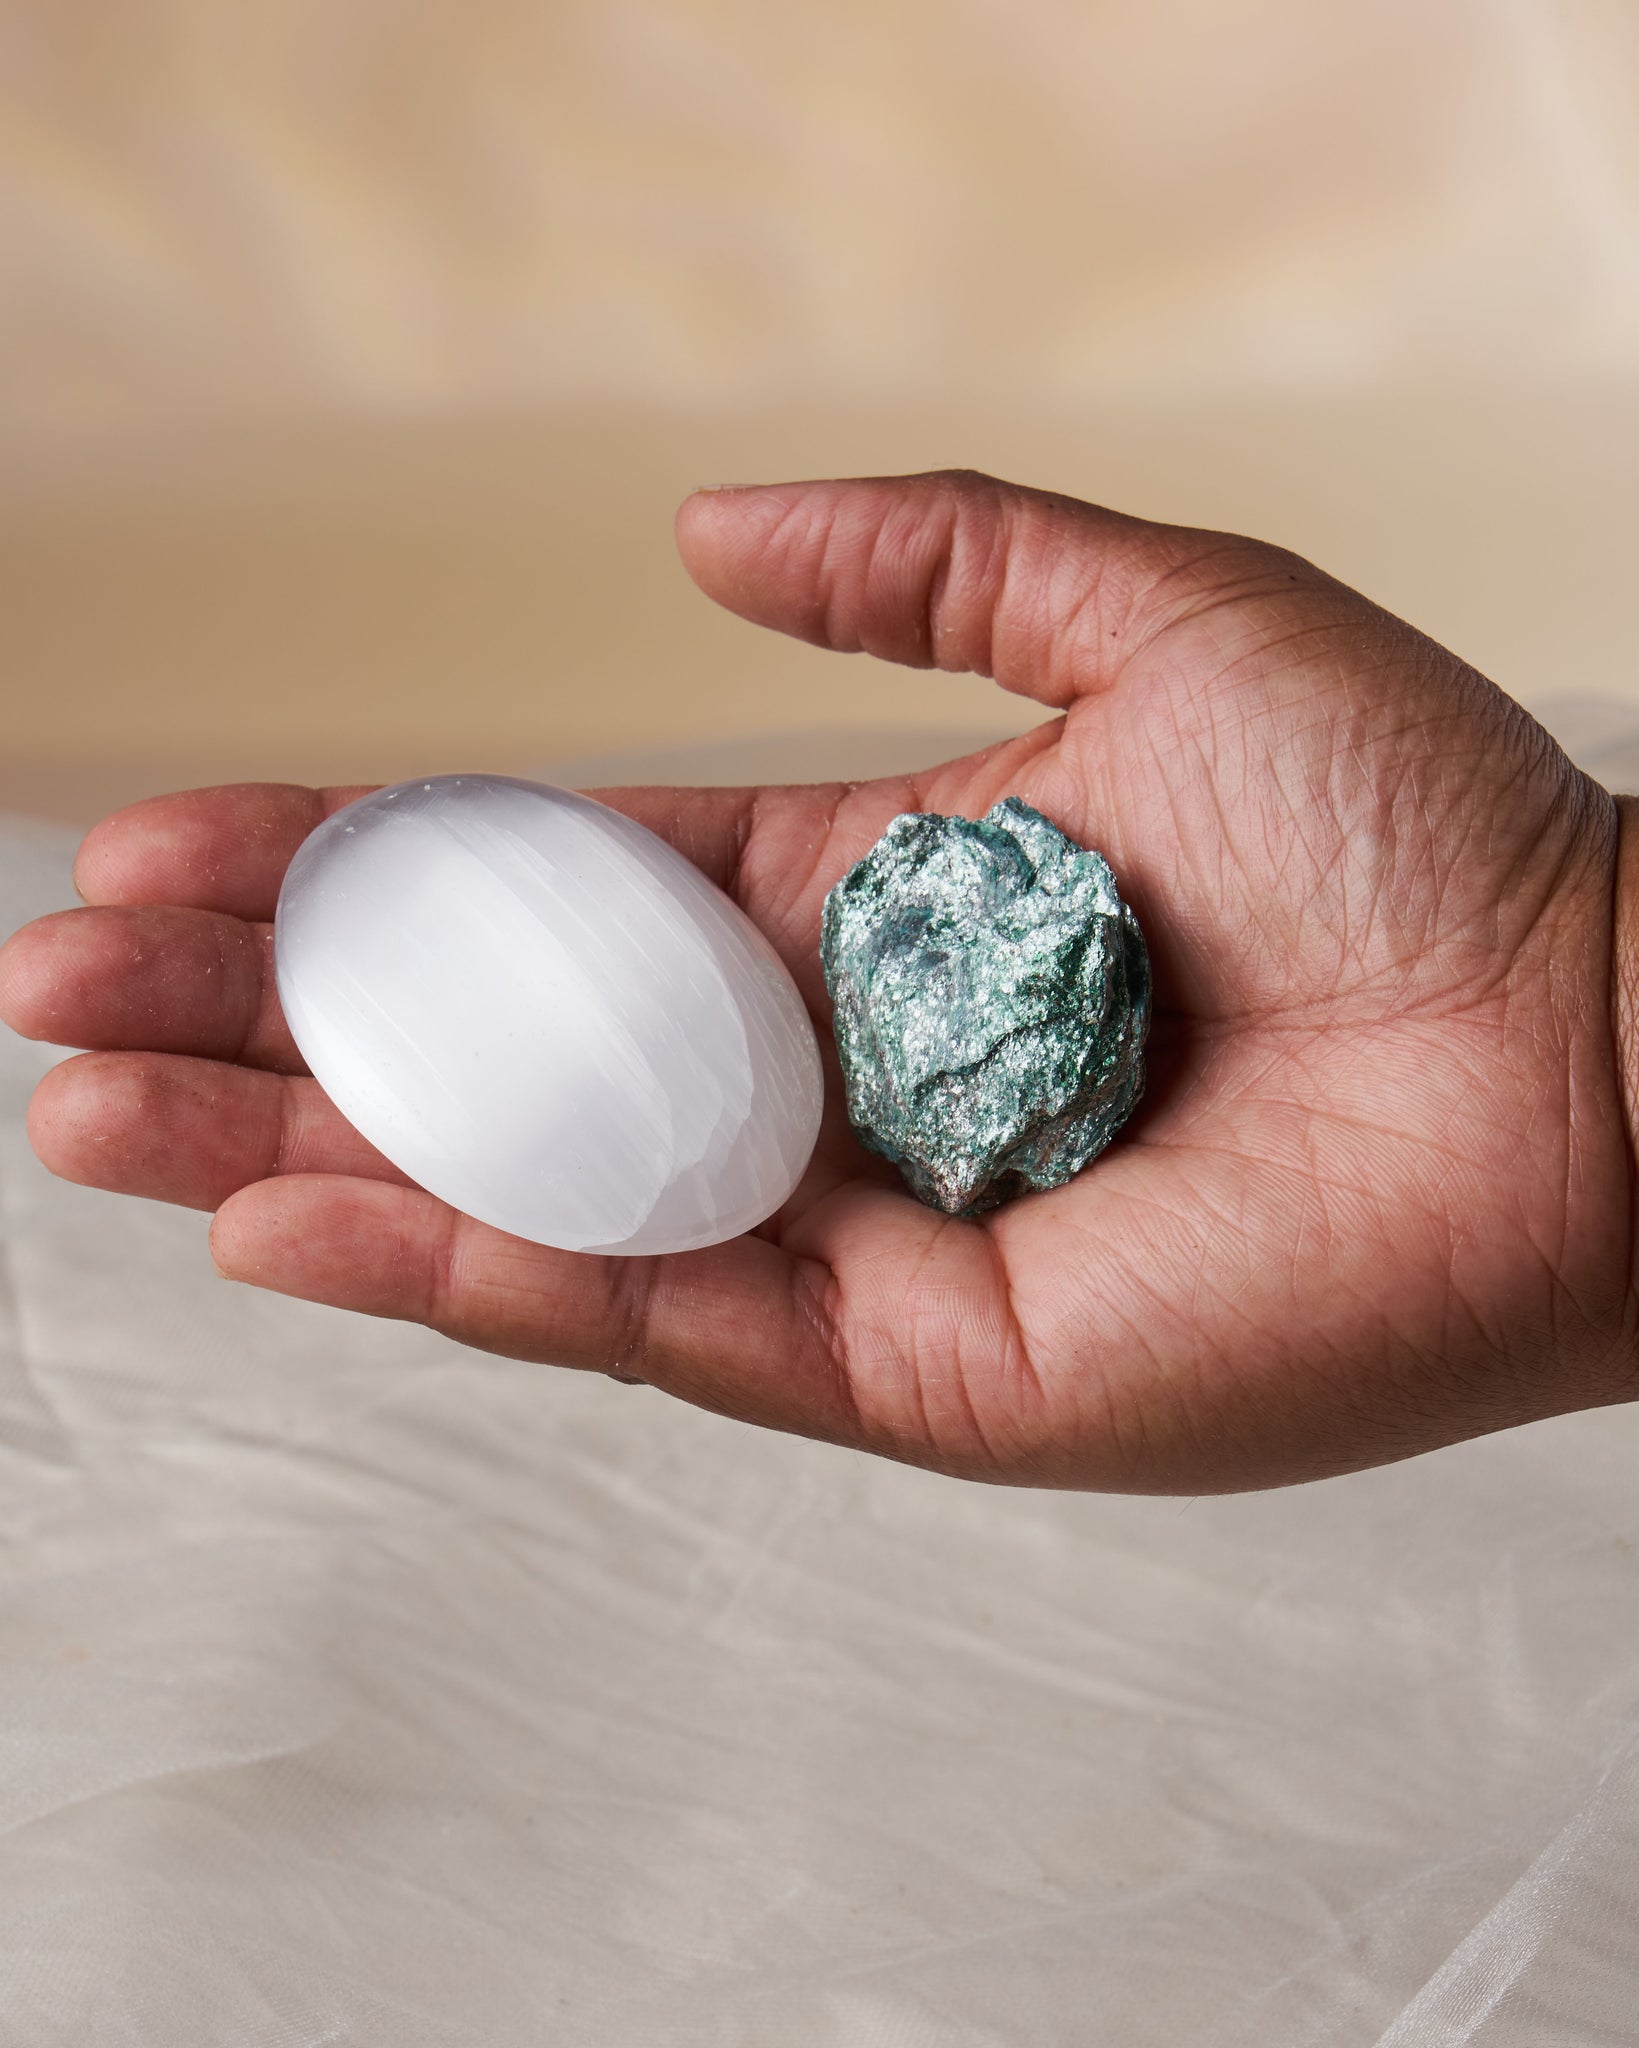 Experience the Spiritual Power of the Fuchsite Stone and Selenite Palm Stone from Our Ancestral Altar + Veneration Kit - Connect with Your Ancestors and Elevate Your Space.